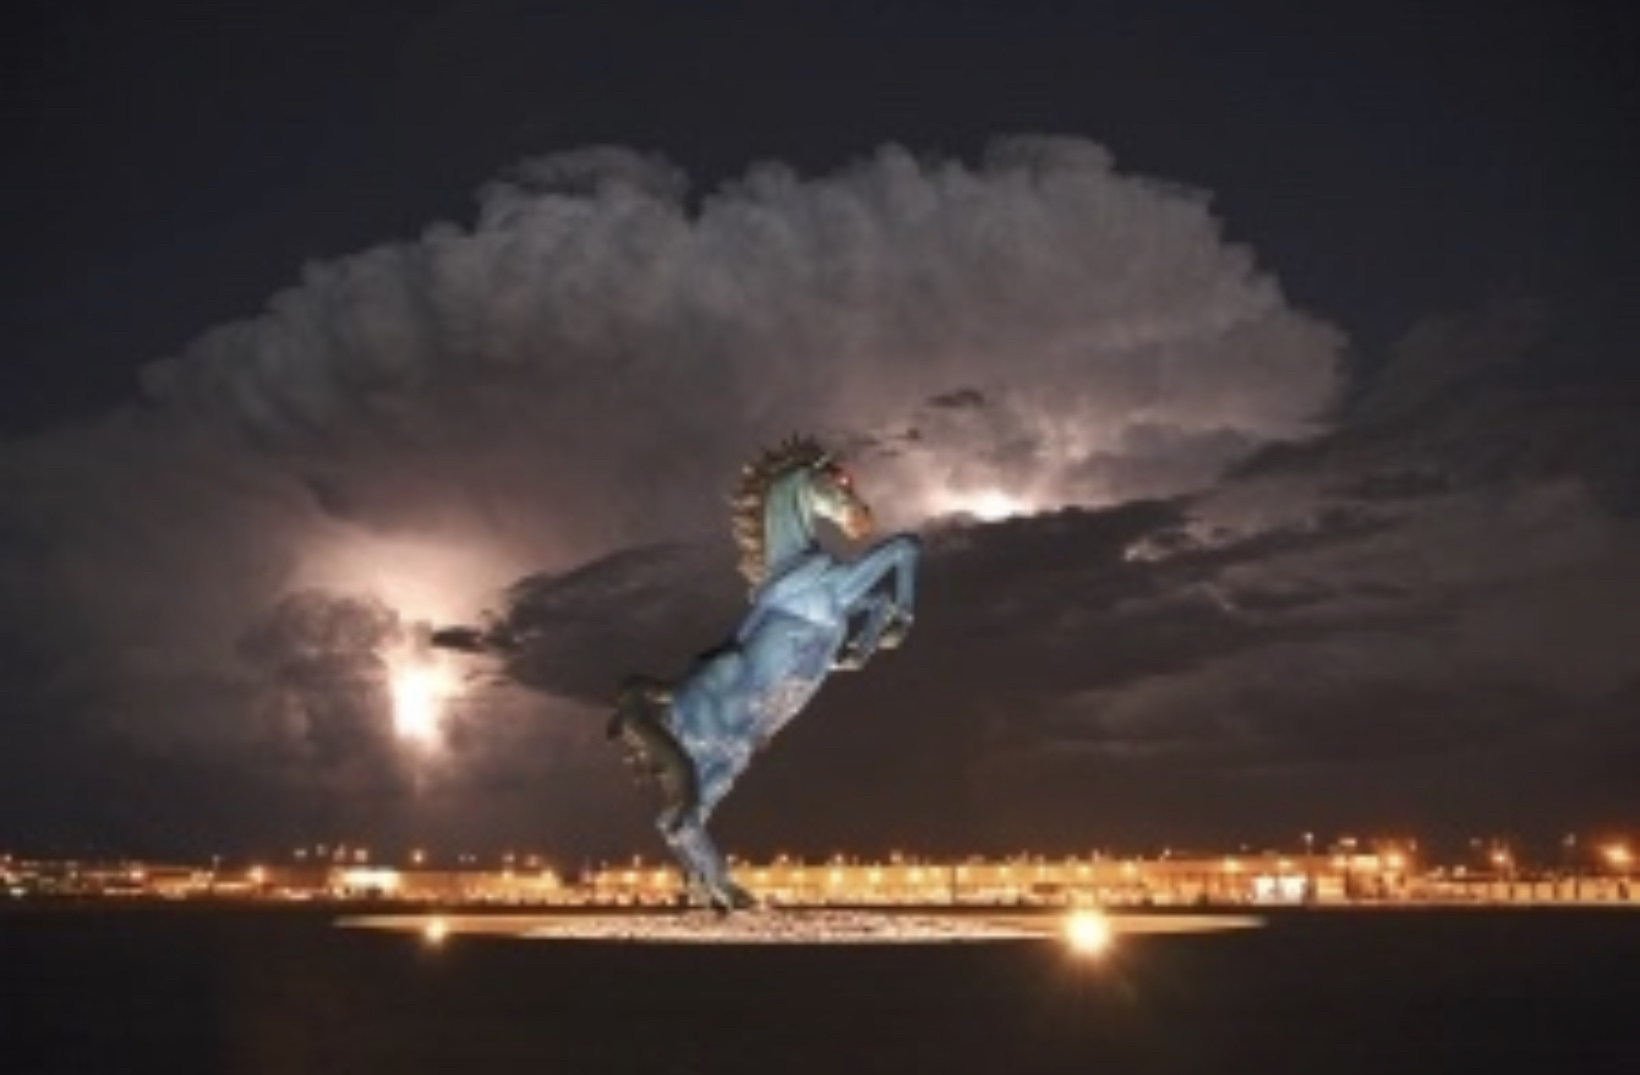 Giant blue horse statue with glowing red eyes outside of Denver International Airport